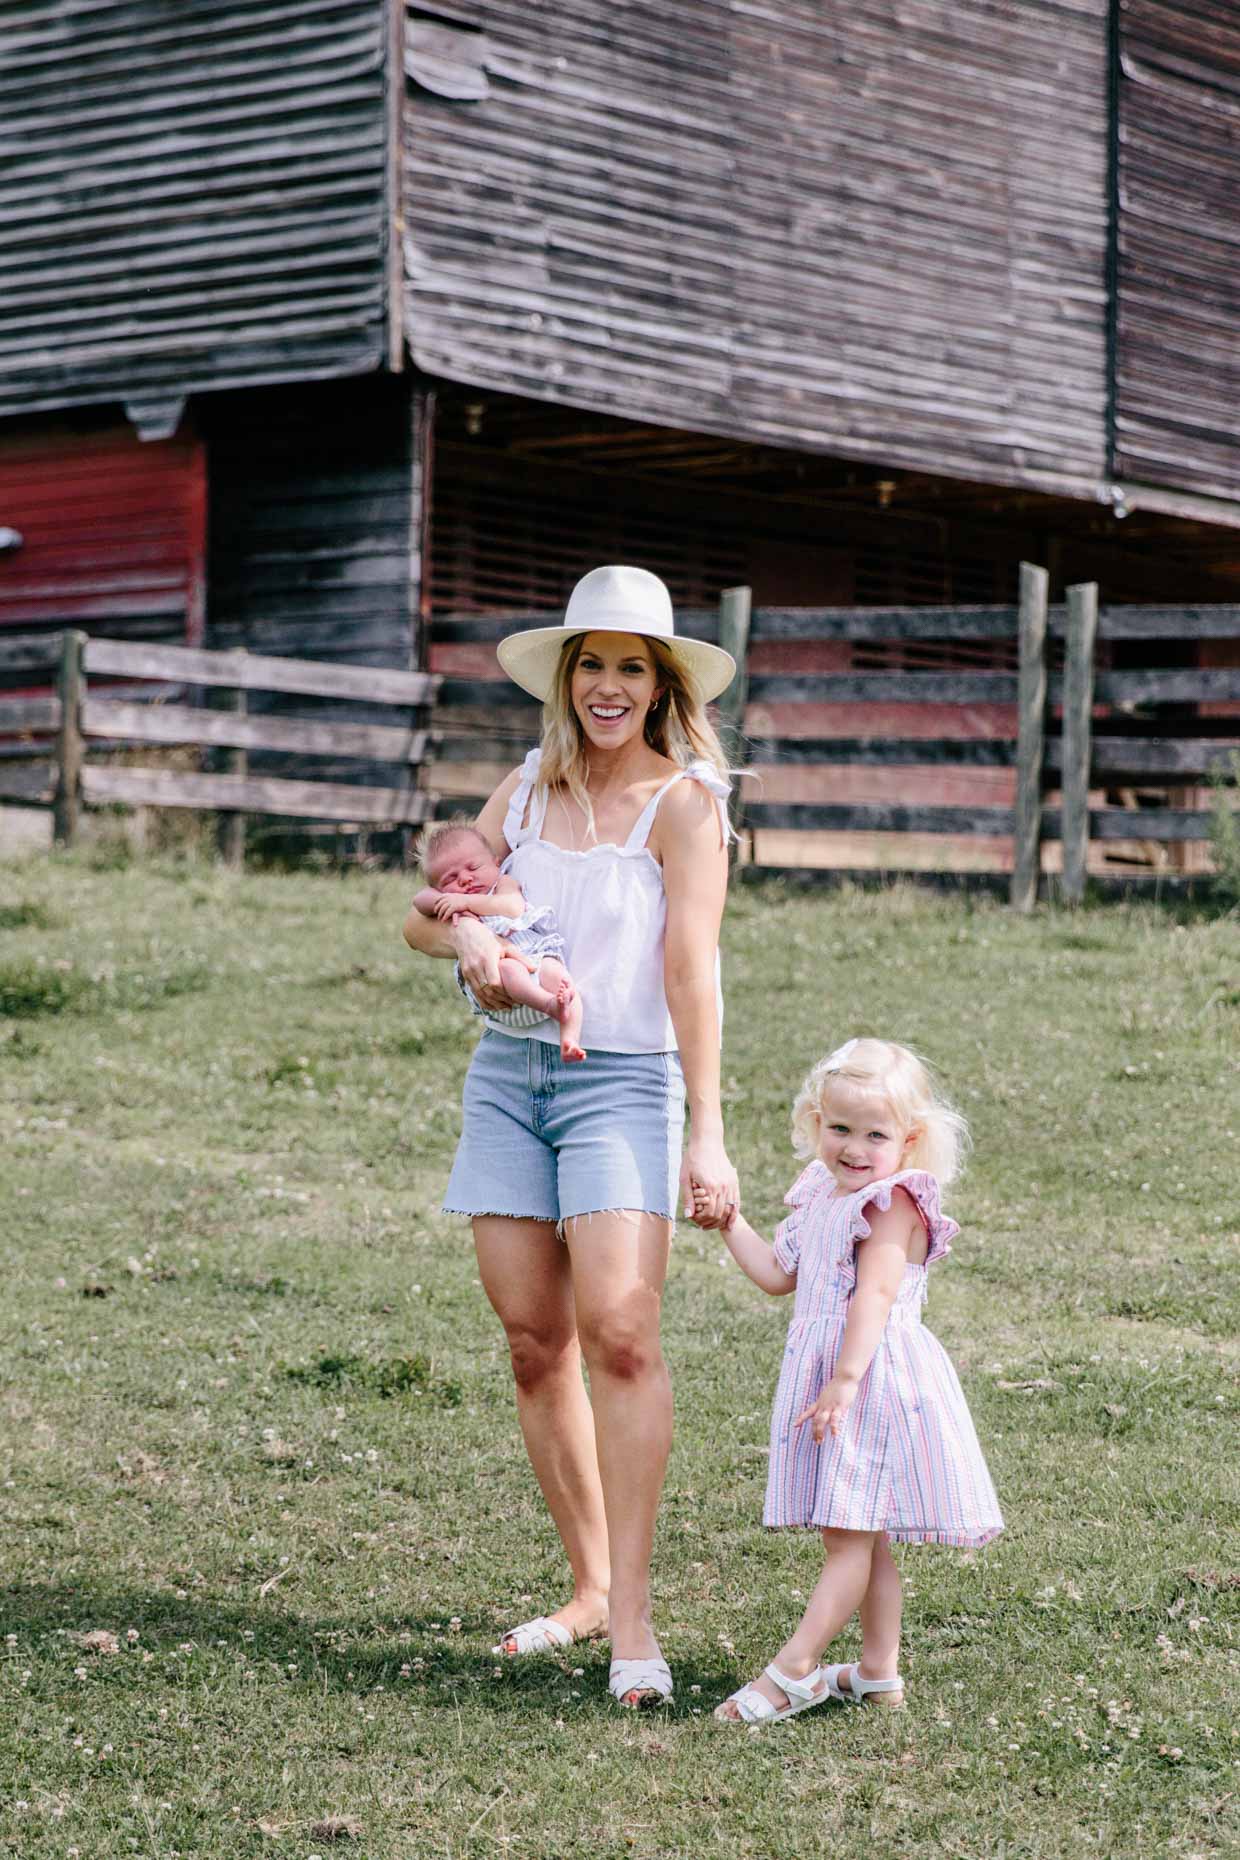 Meagan Brandon of Meagan's Moda shares Mommy and Me style for Fourth of July with daughters, how to coordinate outfits for family pictures